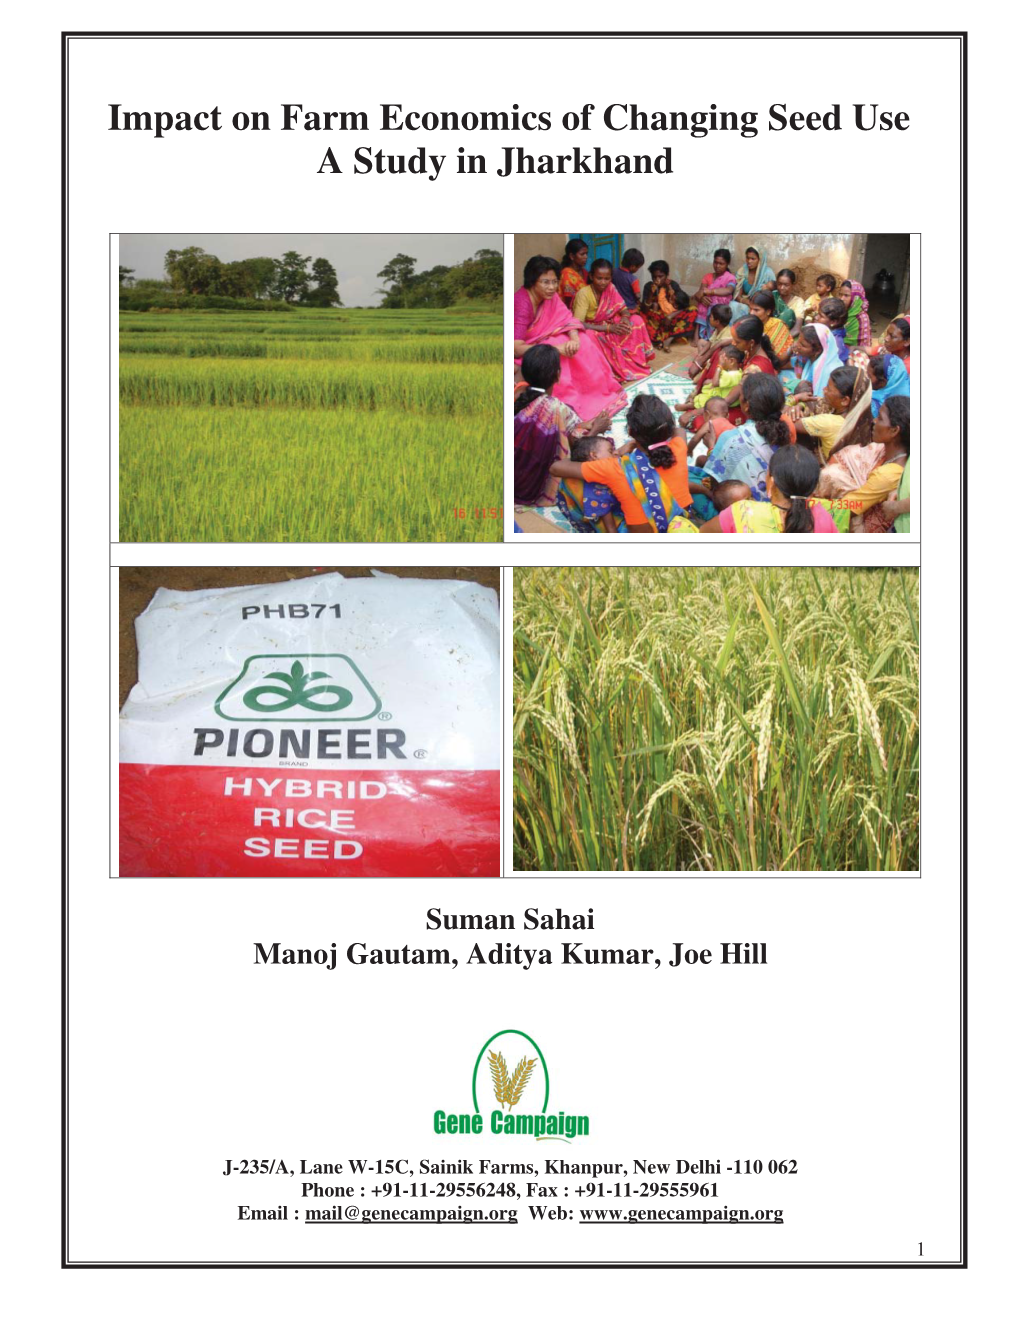 Impact on Farm Economics of Changing Seed Use a Study in Jharkhand